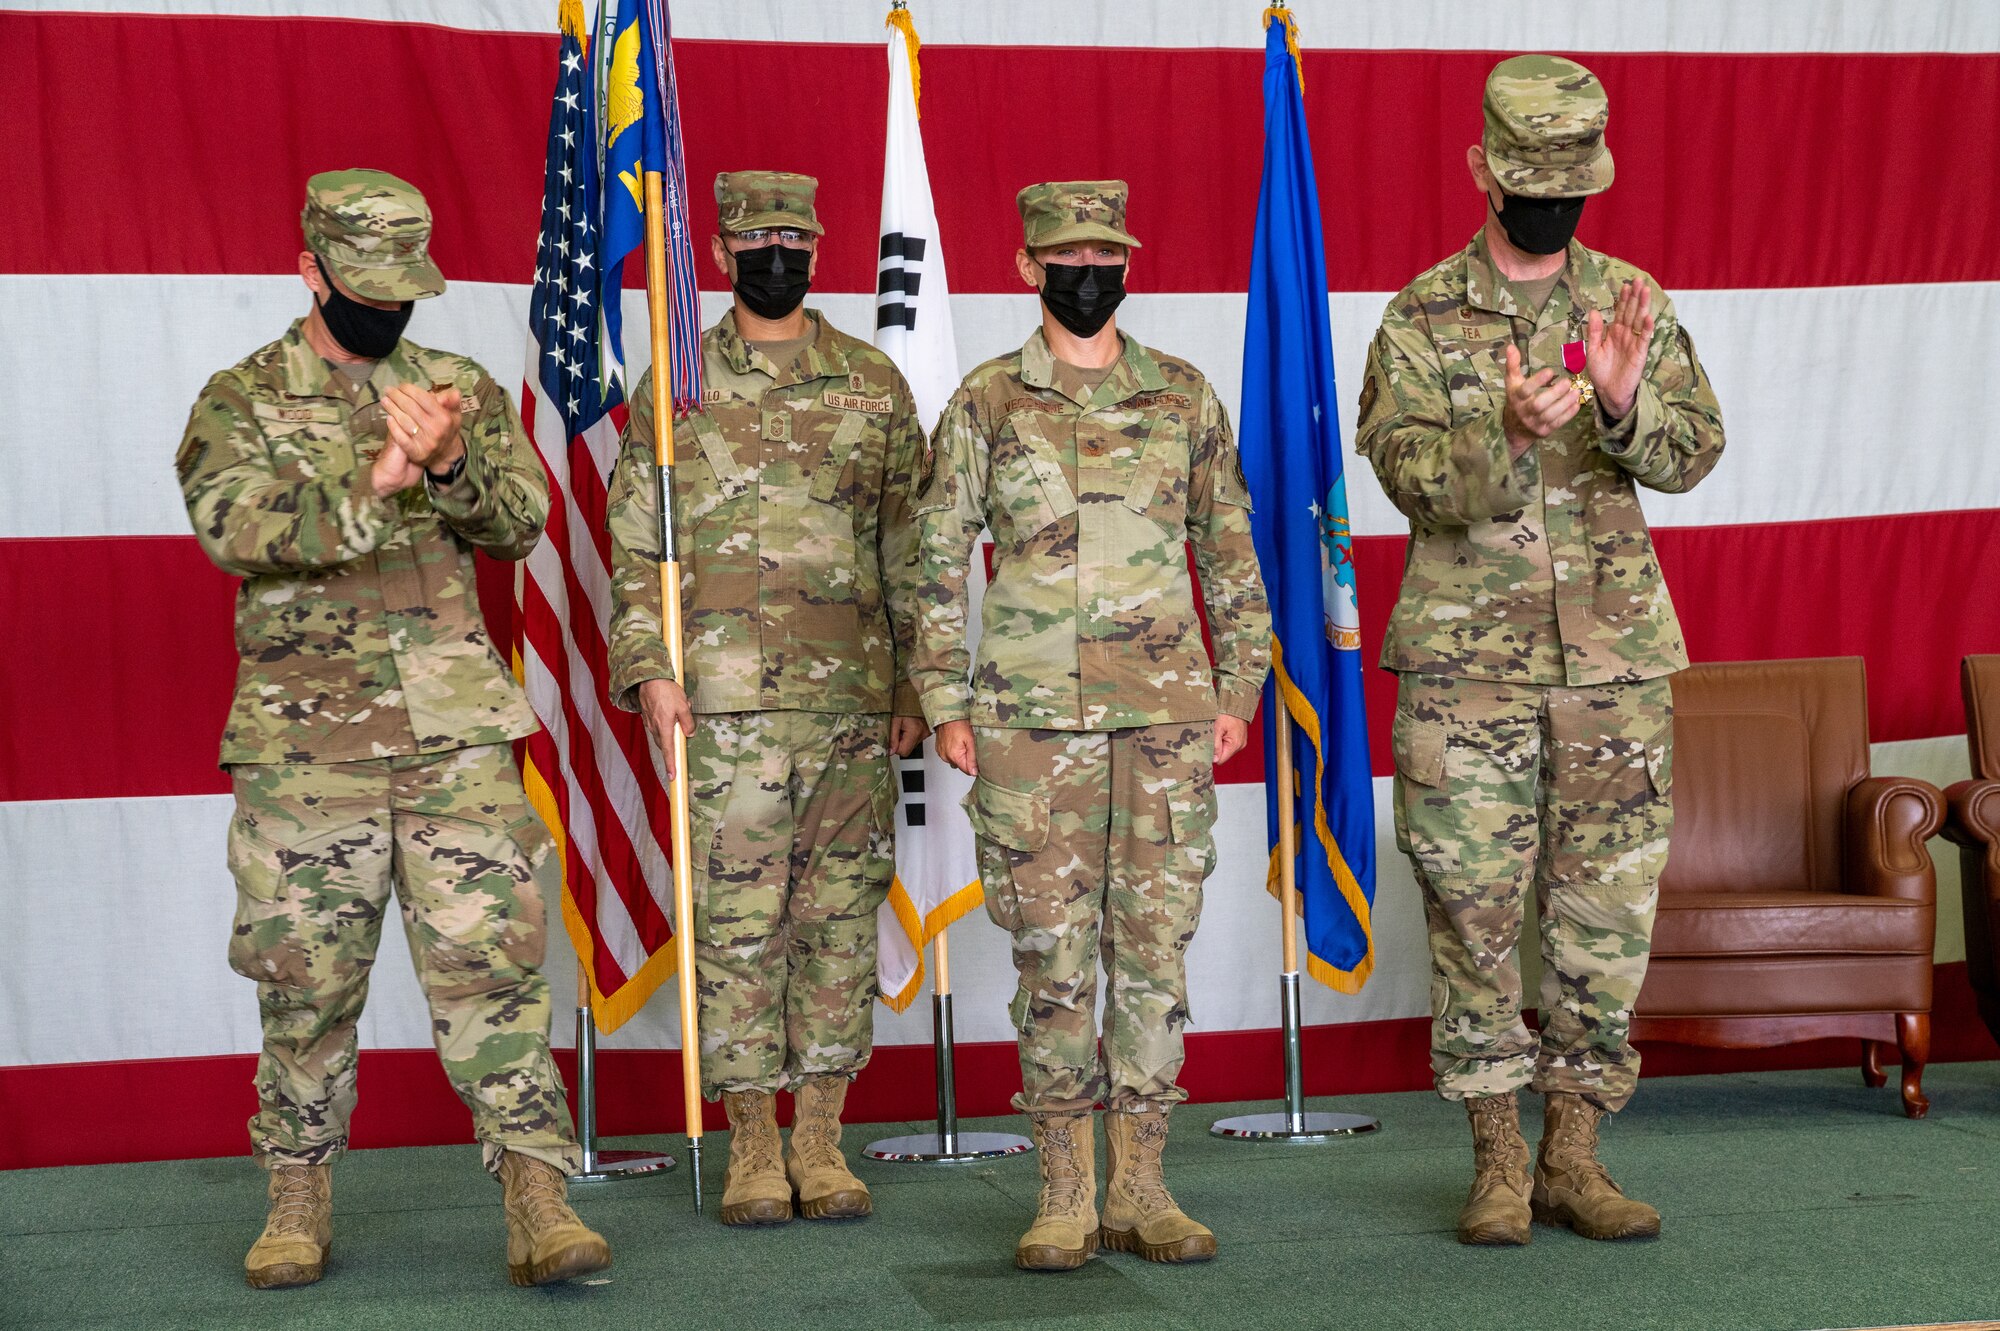 Col. Jennifer Vecchione, 51st Medical Group commander, center right, receives applause during the 51st Medical Group change of command at Osan Air Base, Republic of Korea, July 12, 2021. The change of command ceremony is deeply rooted in military tradition that dates back to the reign of King Frederick of Prussia and has persisted into modern day. (U.S. Air Force photo by Tech. Sgt. Nicholas Alder)